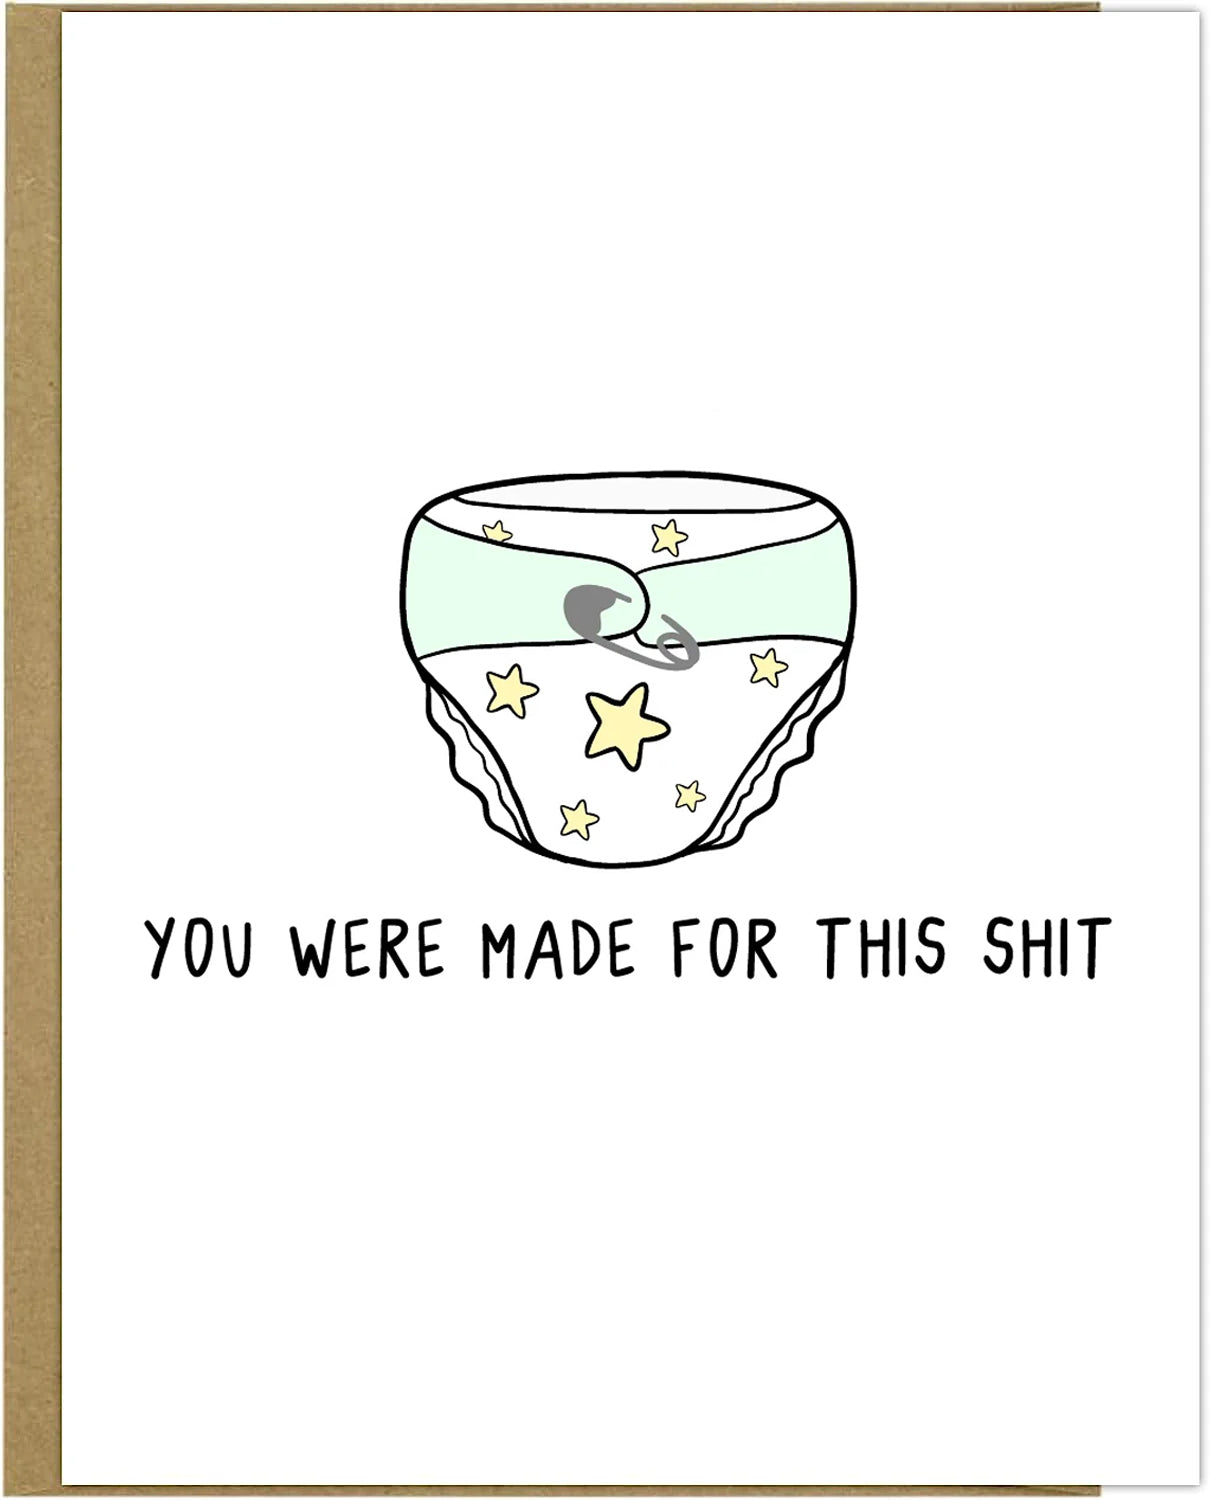 A **Made For This Shit Card** by **rockdoodles** showing an illustration of a diaper with stars and a pacifier, and the text "YOU WERE MADE FOR THIS SHIT." It comes with a natural envelope and is blank inside for your personal message.